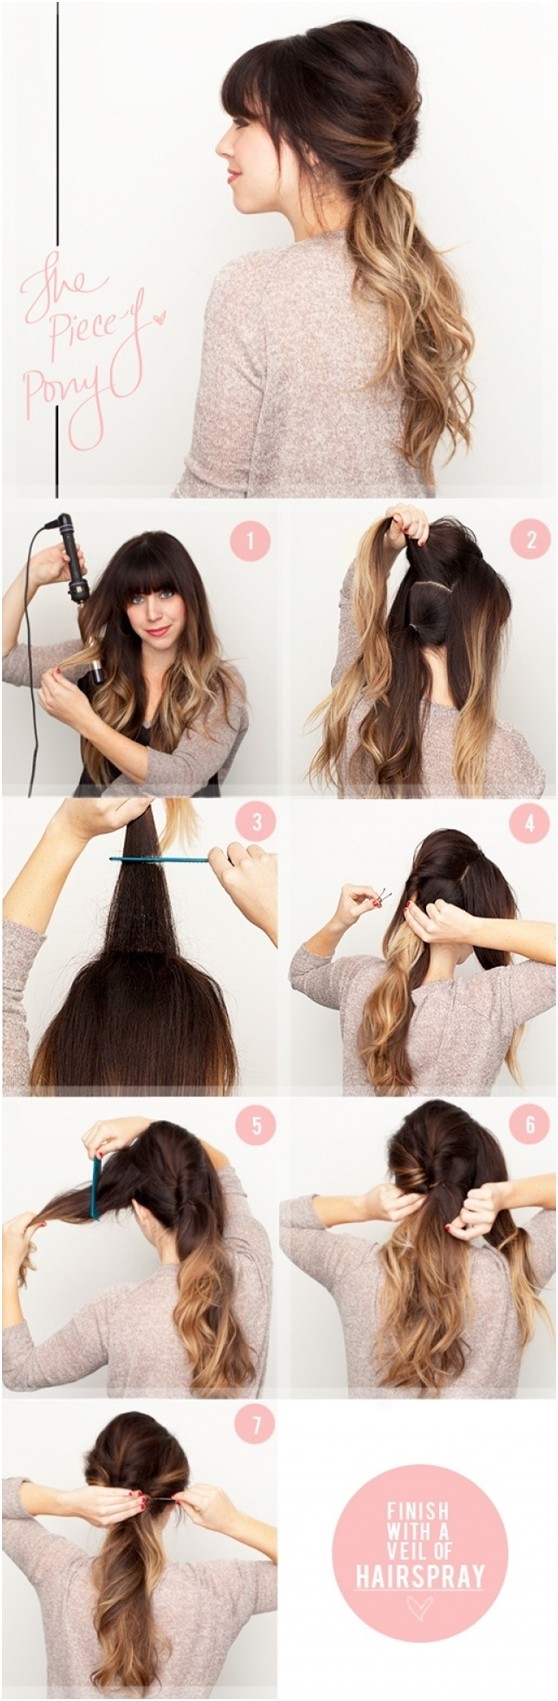 15 Cute And Easy Ponytail Hairstyles Tutorials PoPular Haircuts